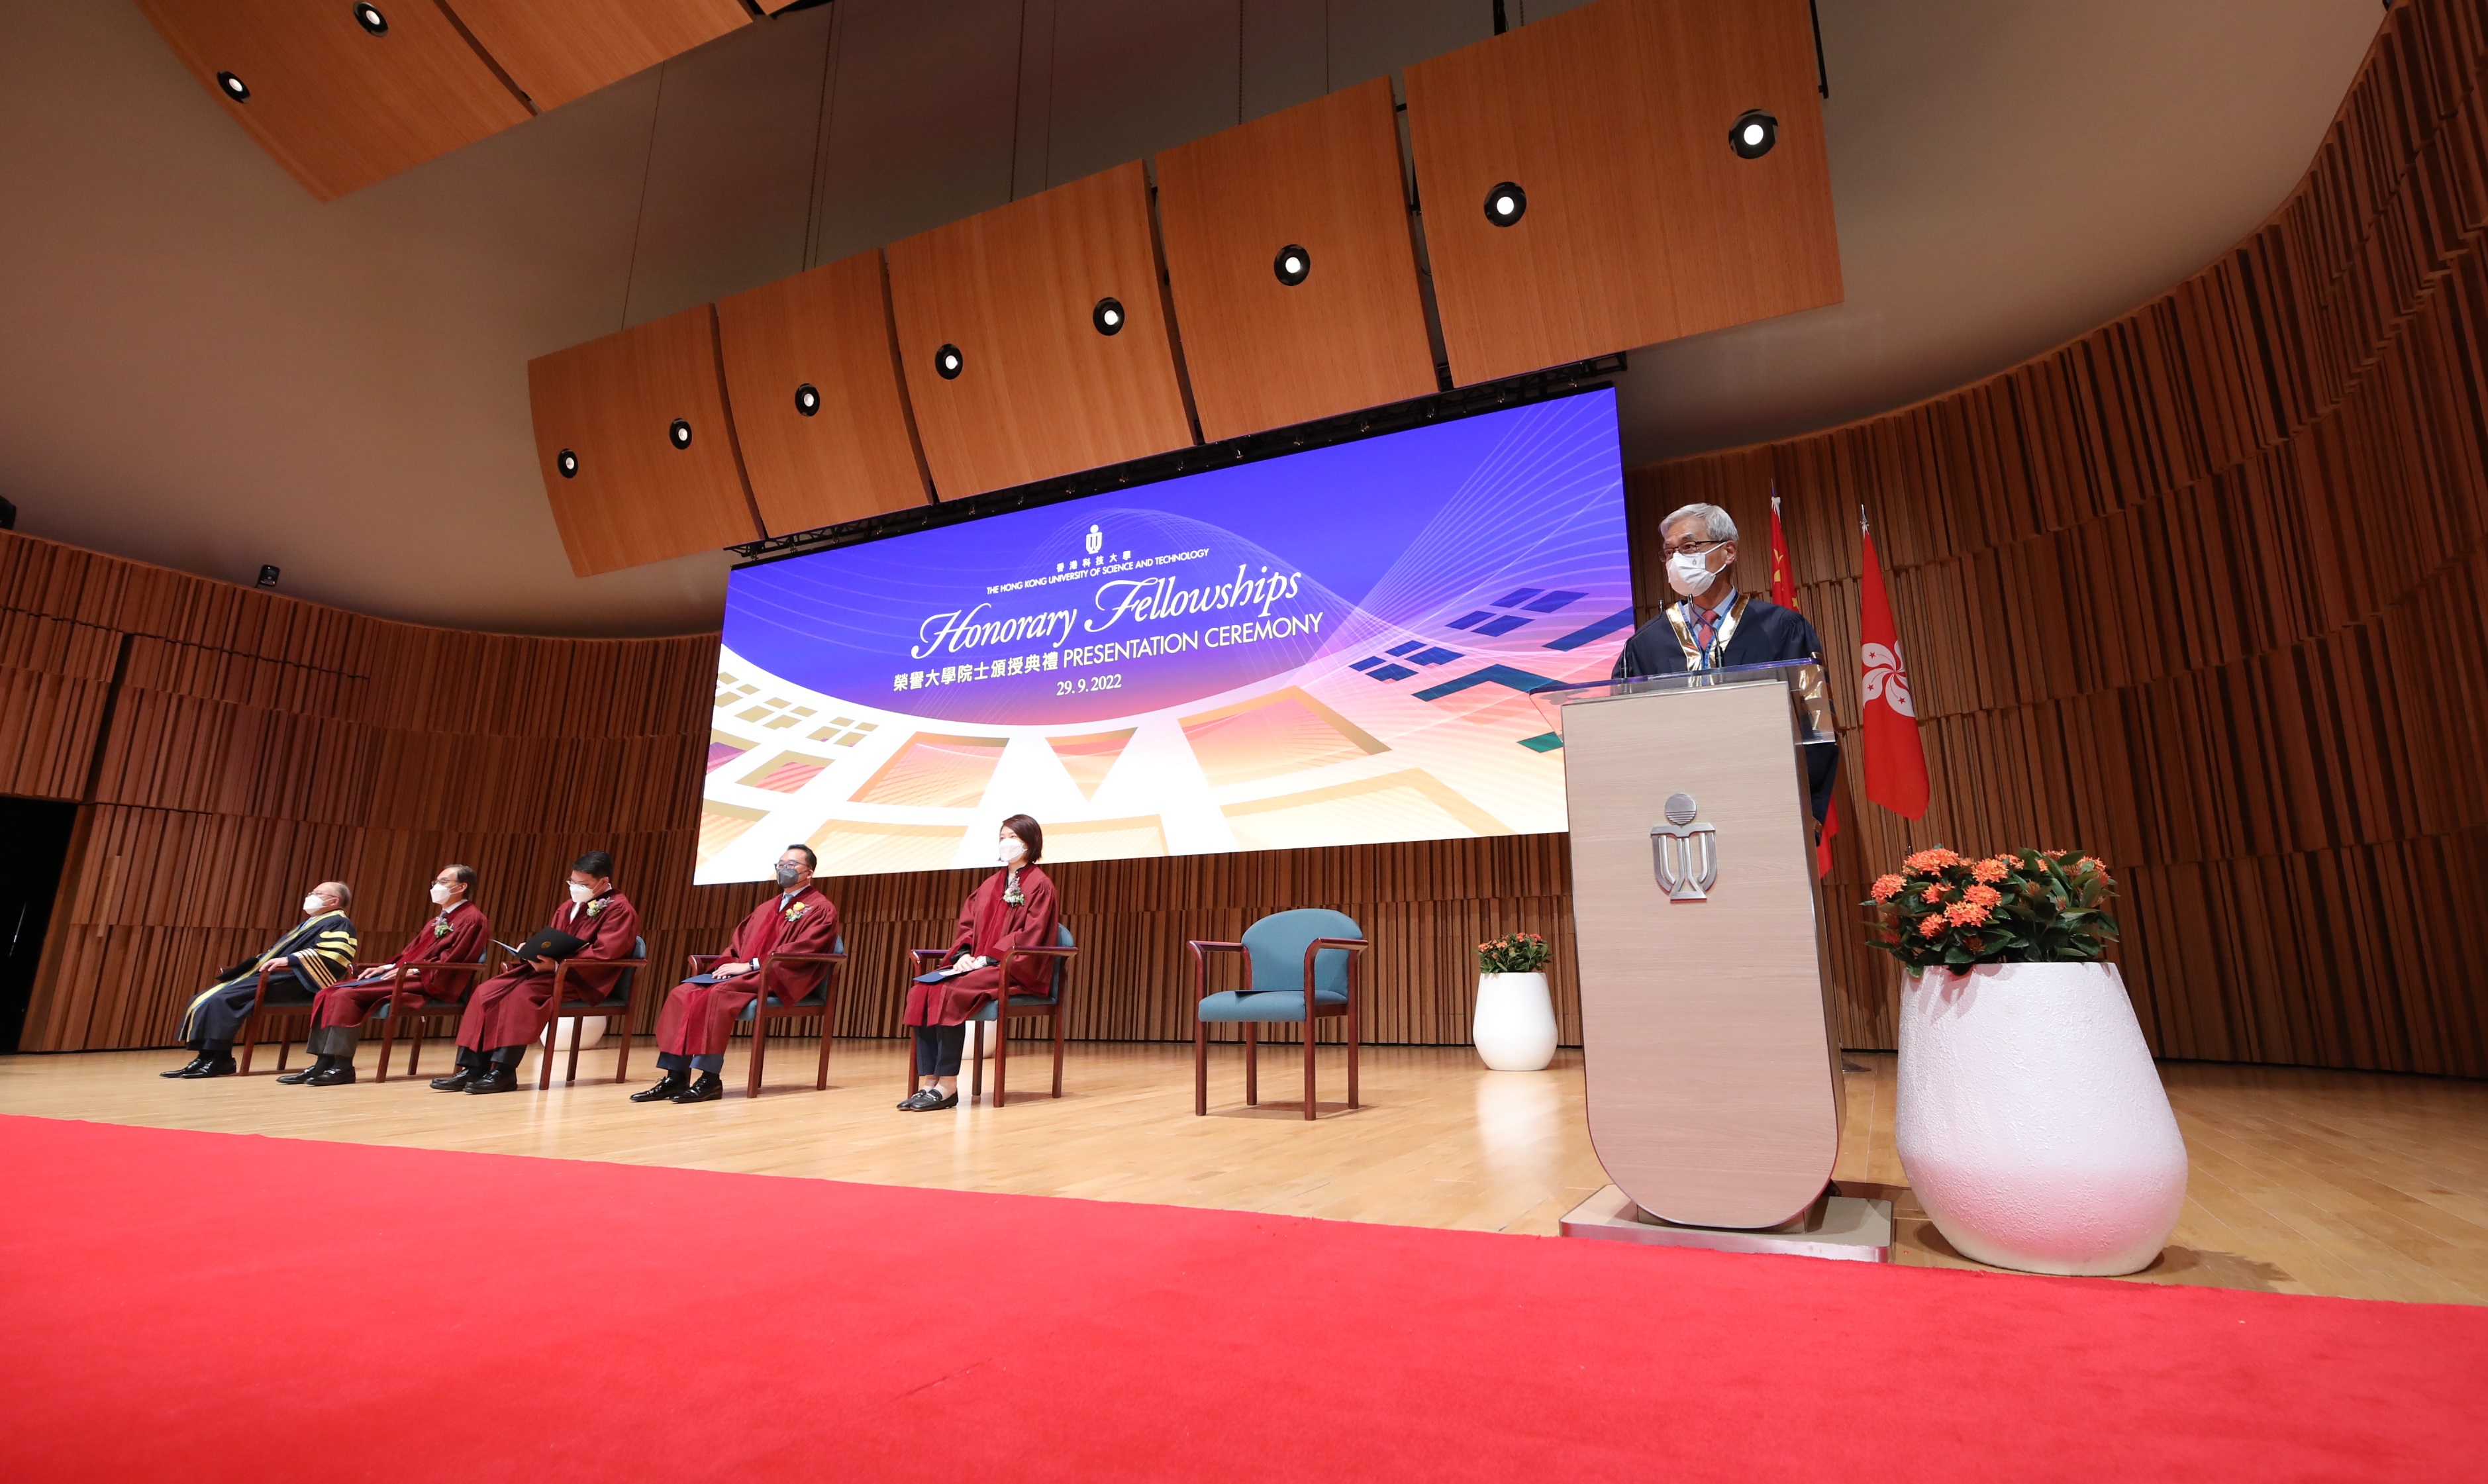 HKUST President Prof. Wei Shyy (first right) delivers opening speech for the ceremony.